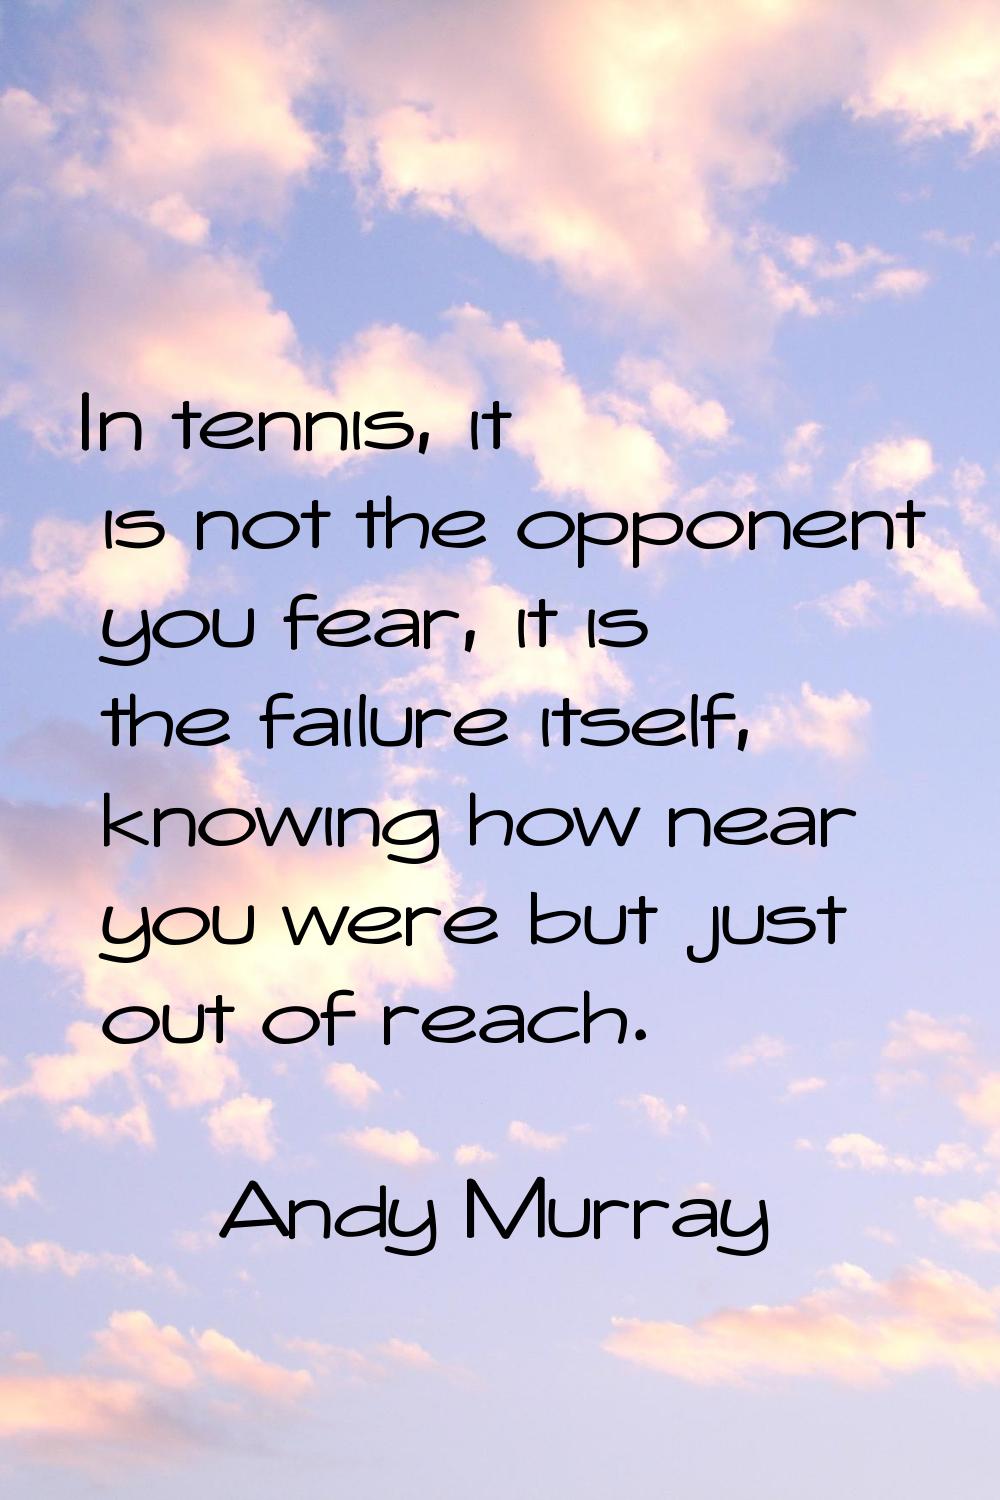 In tennis, it is not the opponent you fear, it is the failure itself, knowing how near you were but